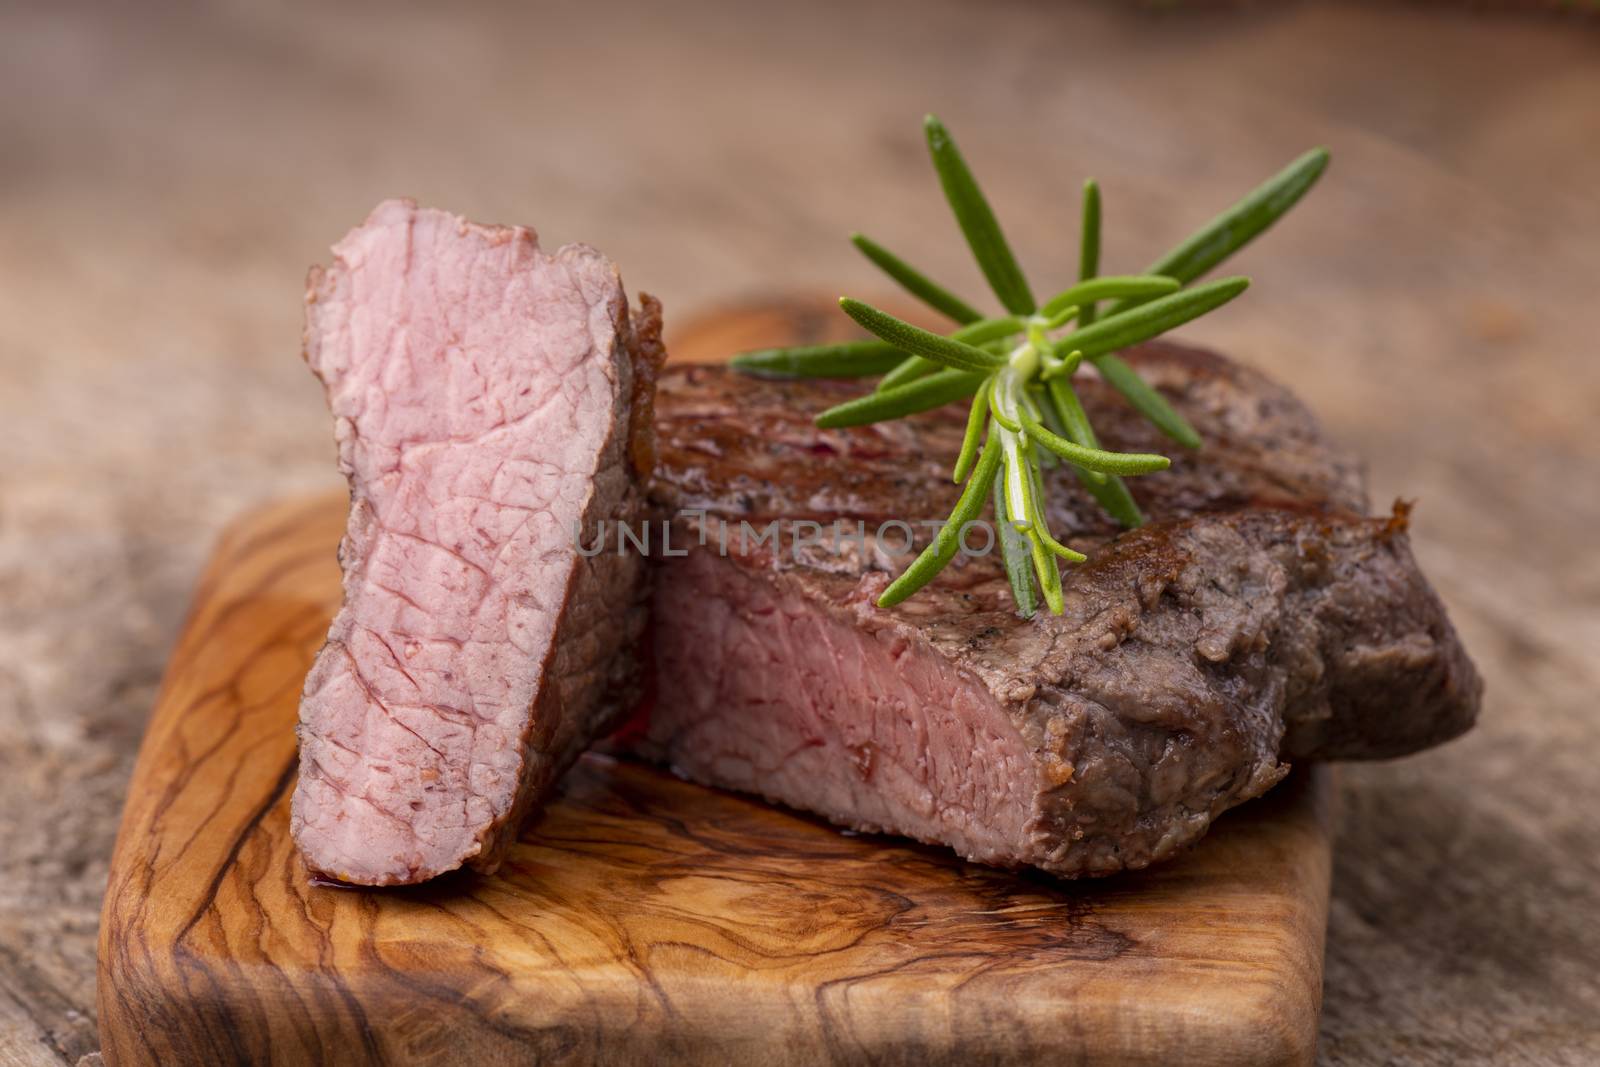 grilled steak on wood with rosemary